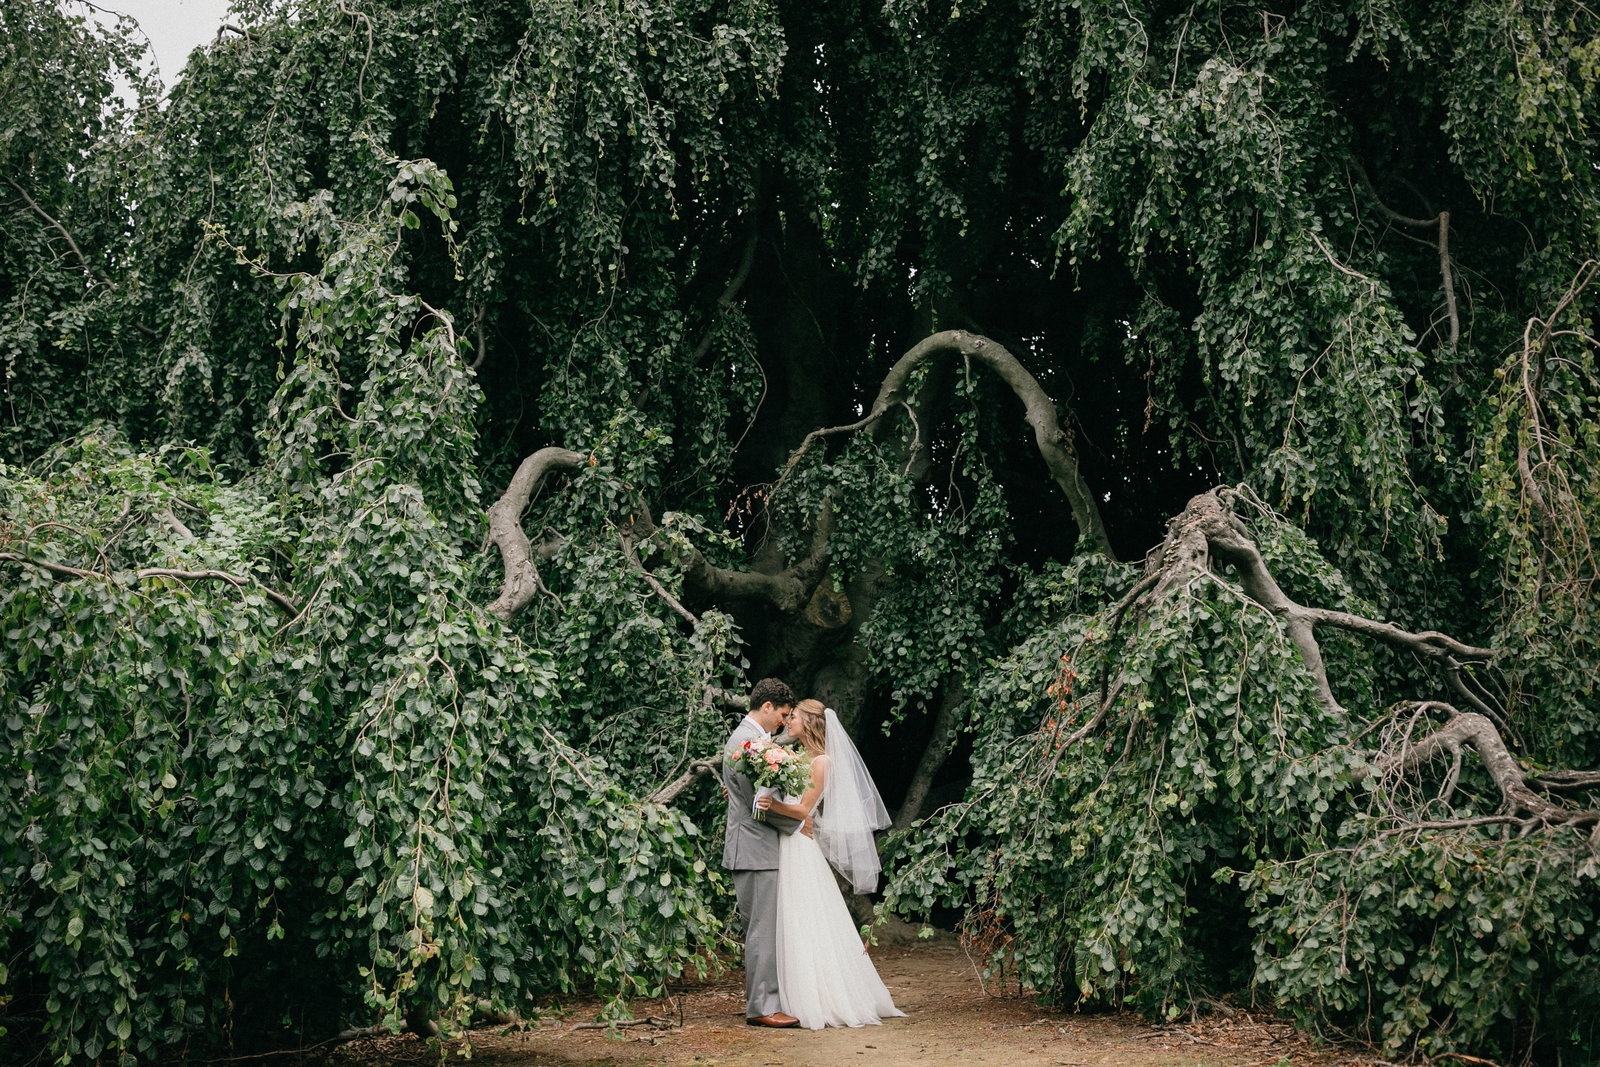 Newly wed couple photographed under a weeping willow tree by Grace Winery Wedding Venue.